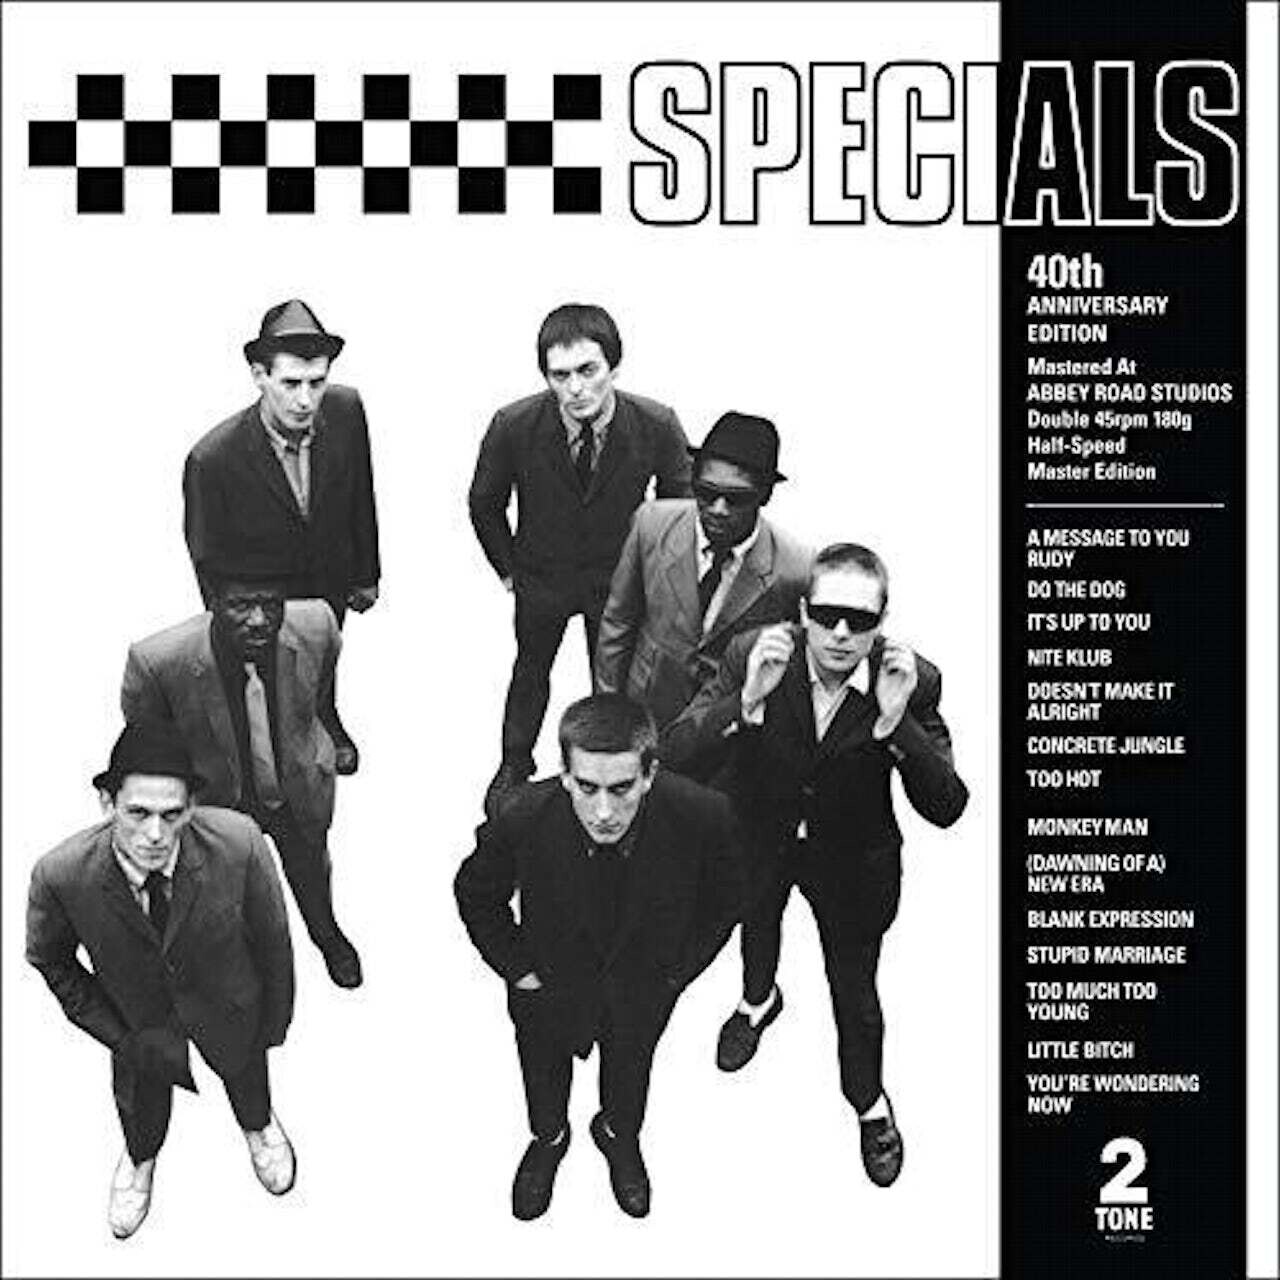 The Specials / The Specials 40th Anniversary Half-Speed Master